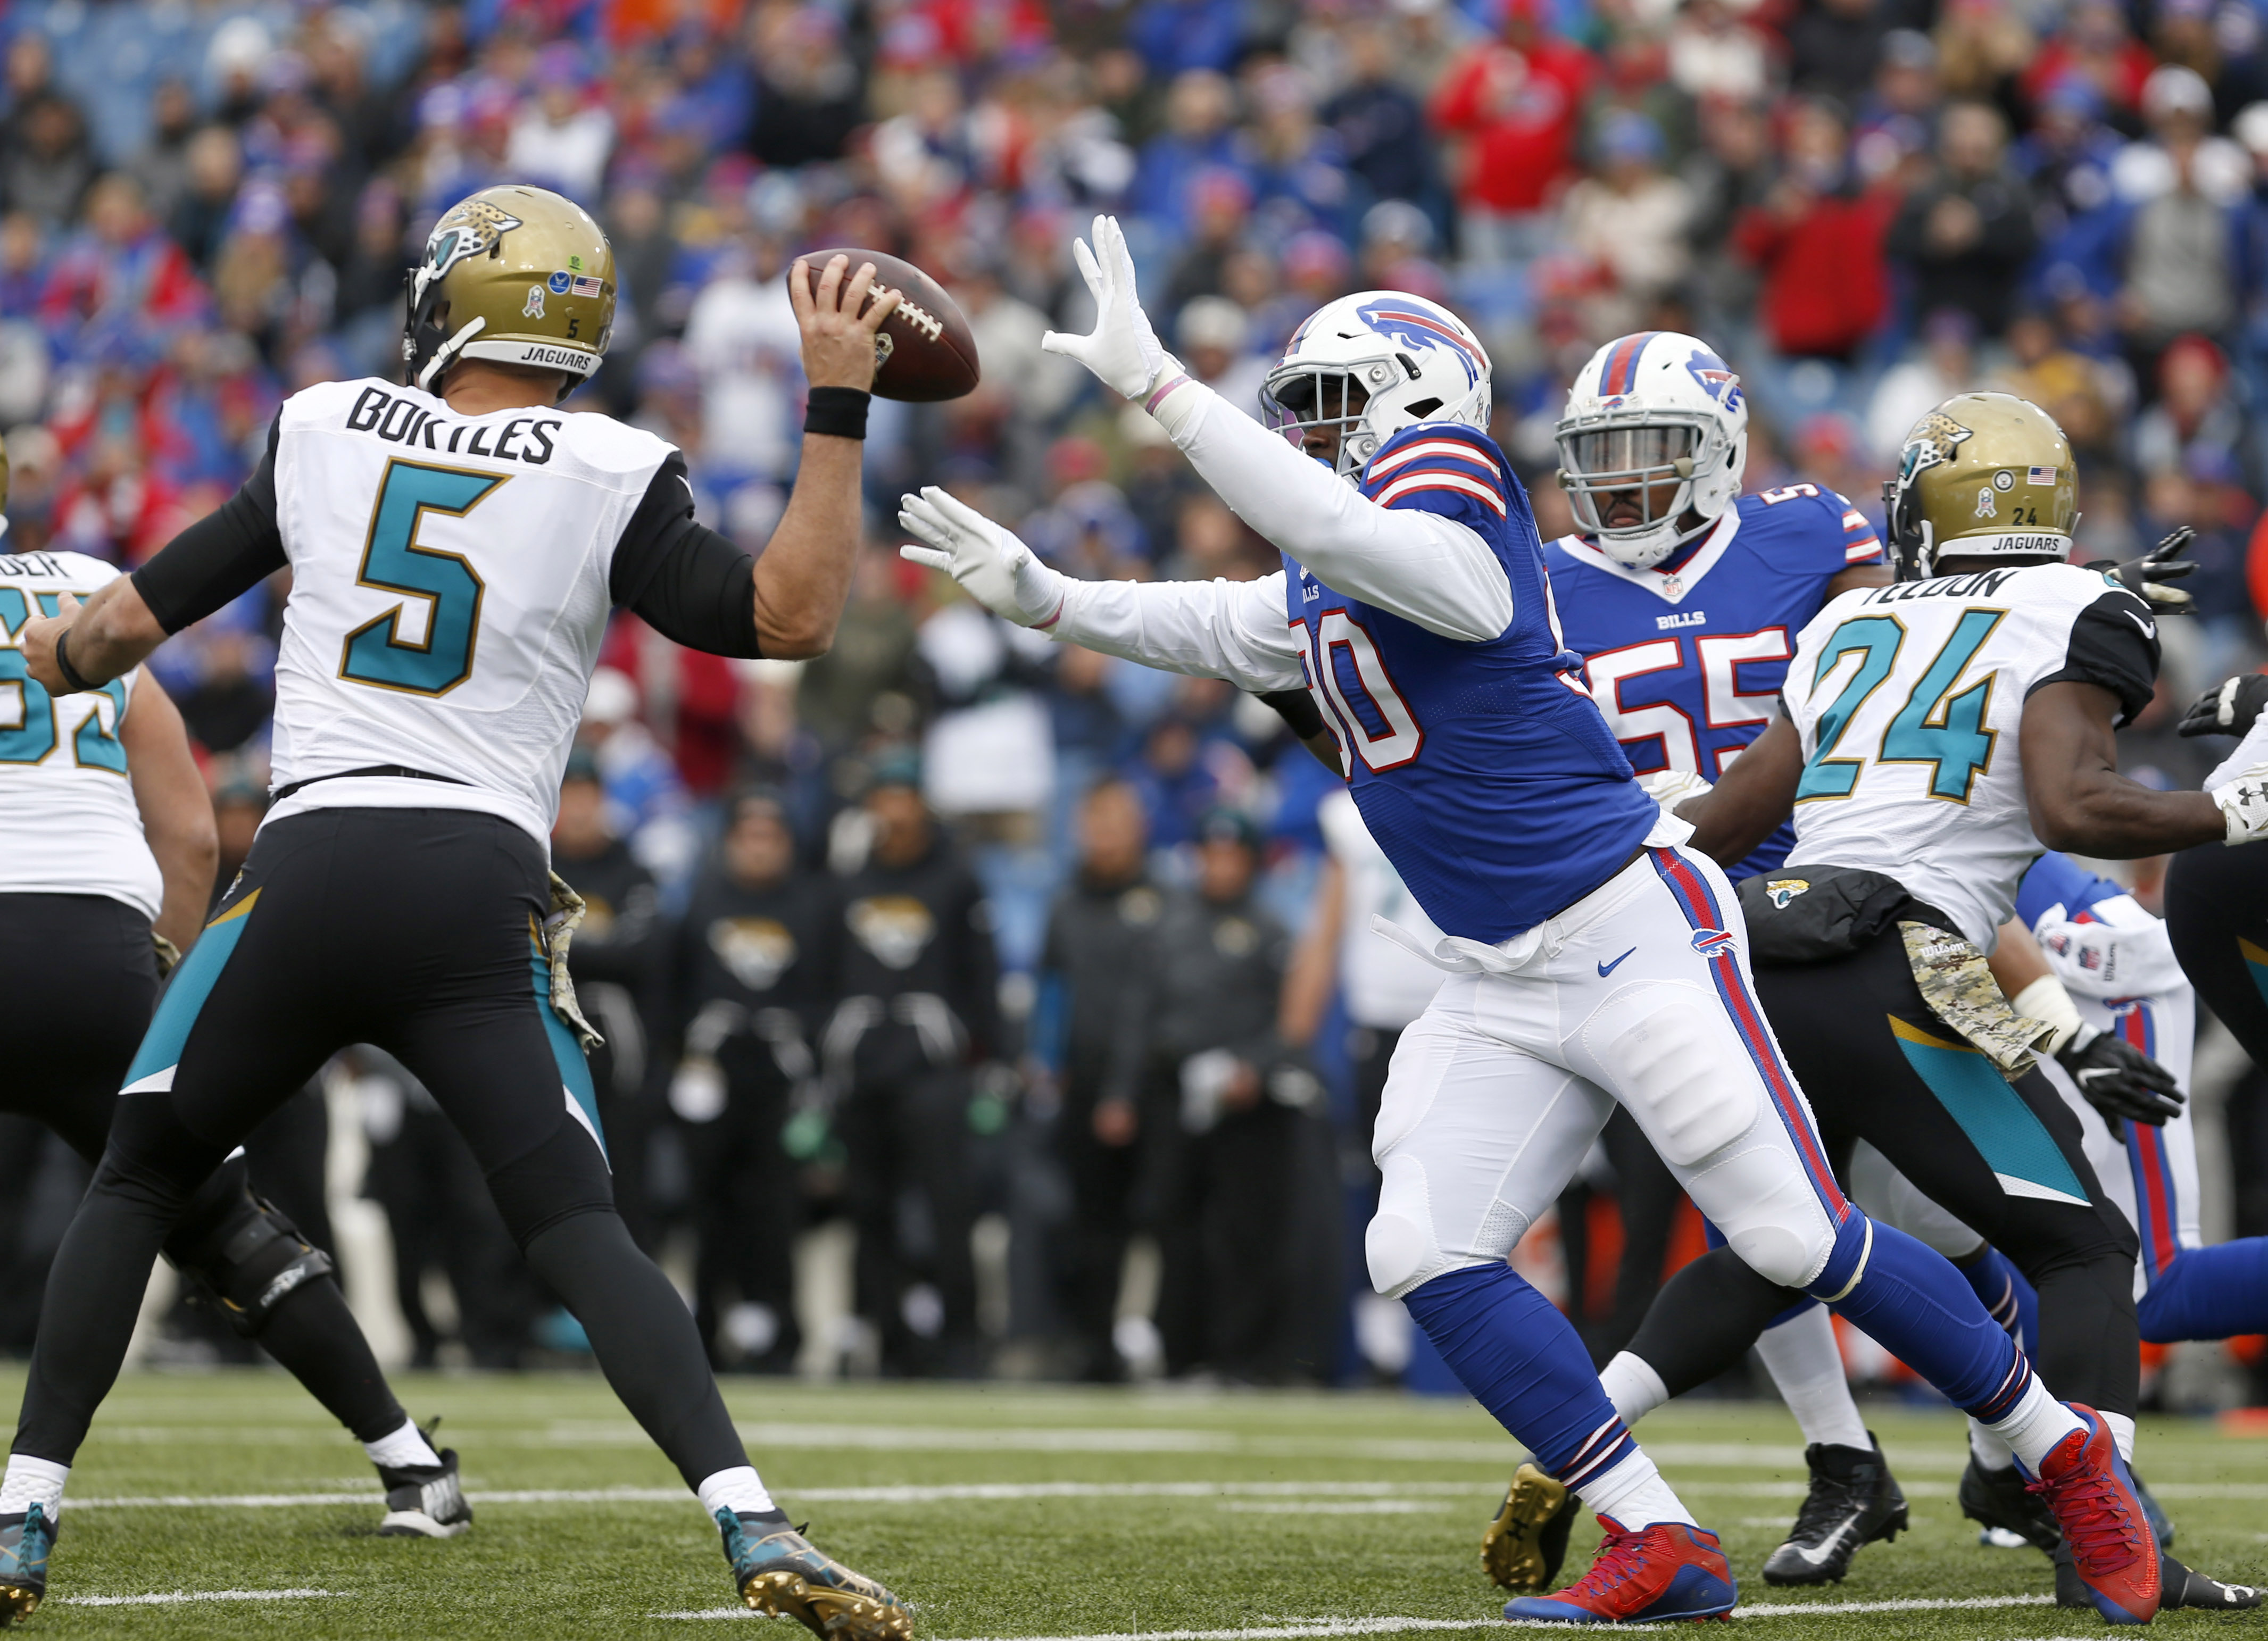 Nov 27, 2016; Orchard Park, NY, USA; Buffalo Bills defensive end Shaq Lawson (90) looks to knock the ball away from Jacksonville Jaguars quarterback Blake Bortles (5) during the first half at New Era Field. Mandatory Credit: Timothy T. Ludwig-USA TODAY Sports